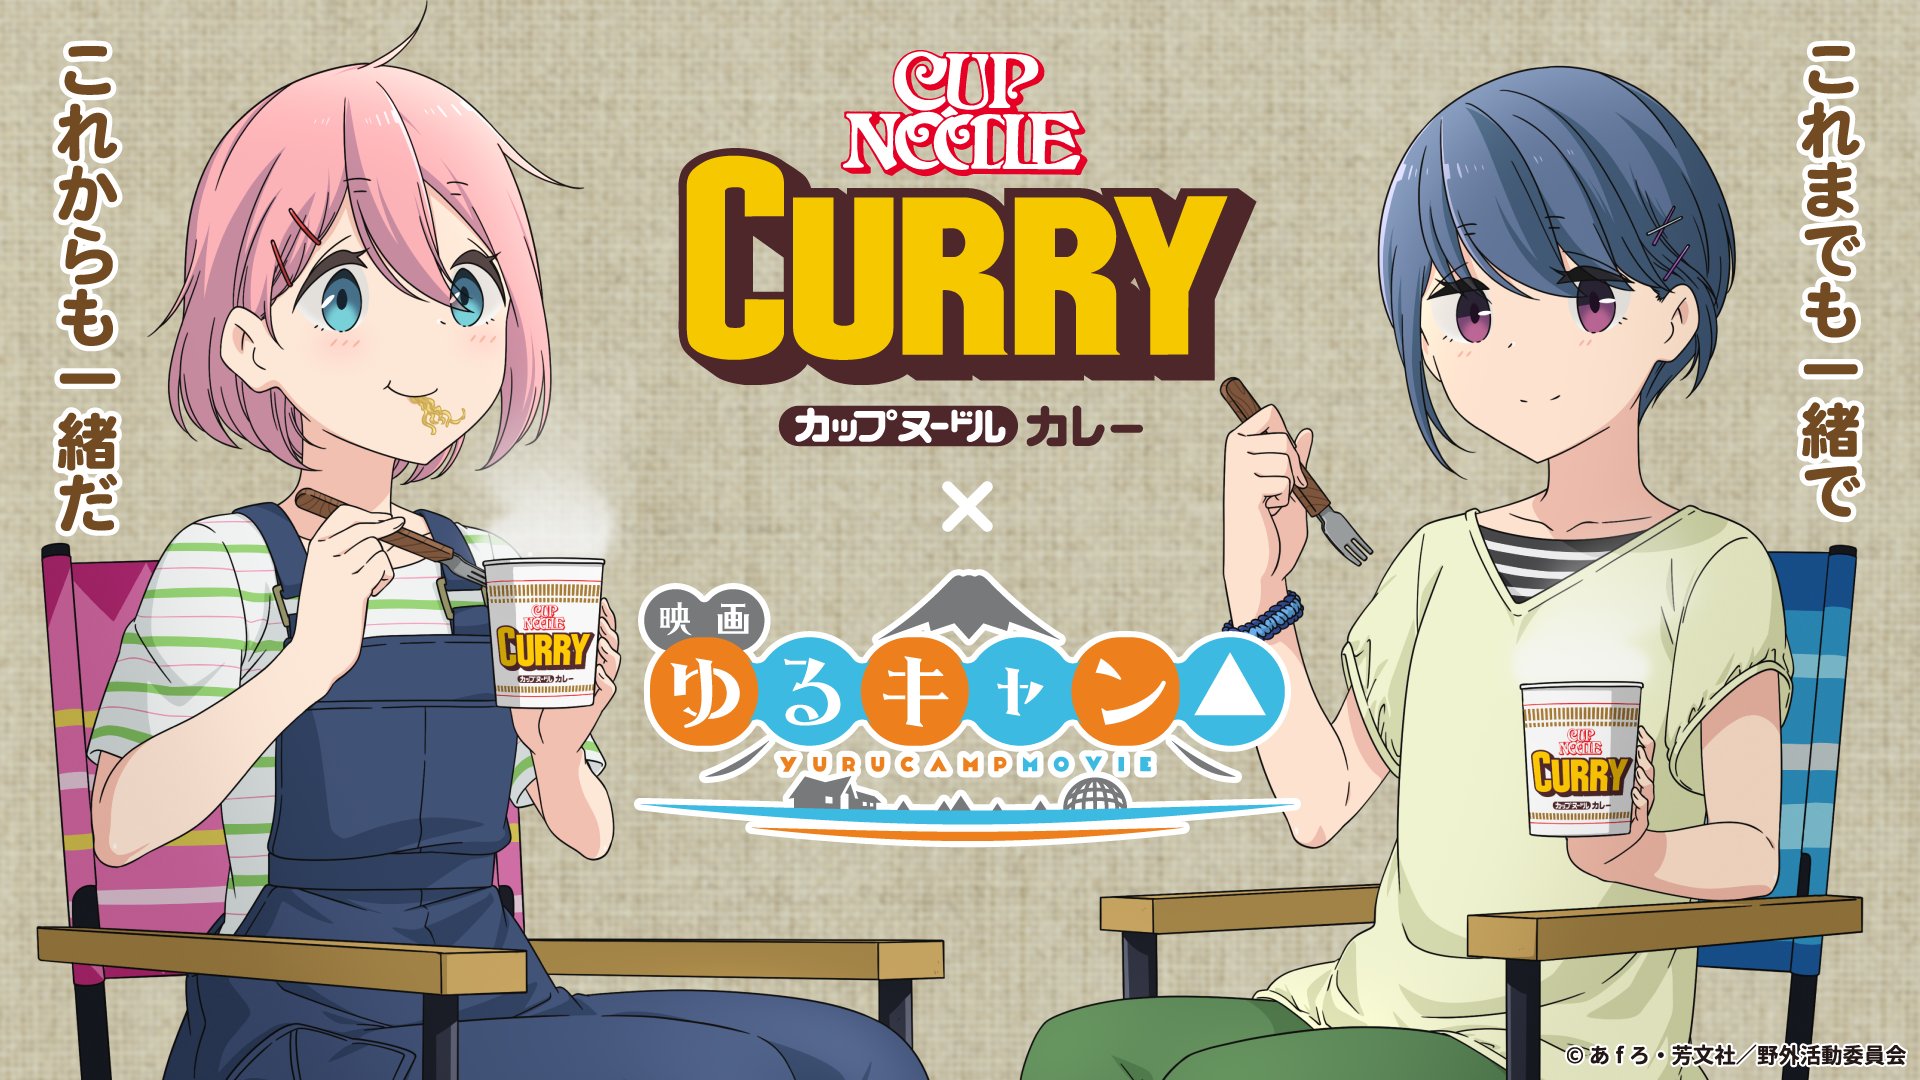 A promotional image for the Cup Noodle Curry x Laid-Back Camp: The Movie collaboration campaign featuring grown-up versions of Nadeshiko and Rin enjoying instant noodles while wearing casual clothing and sitting in camping folding chairs.